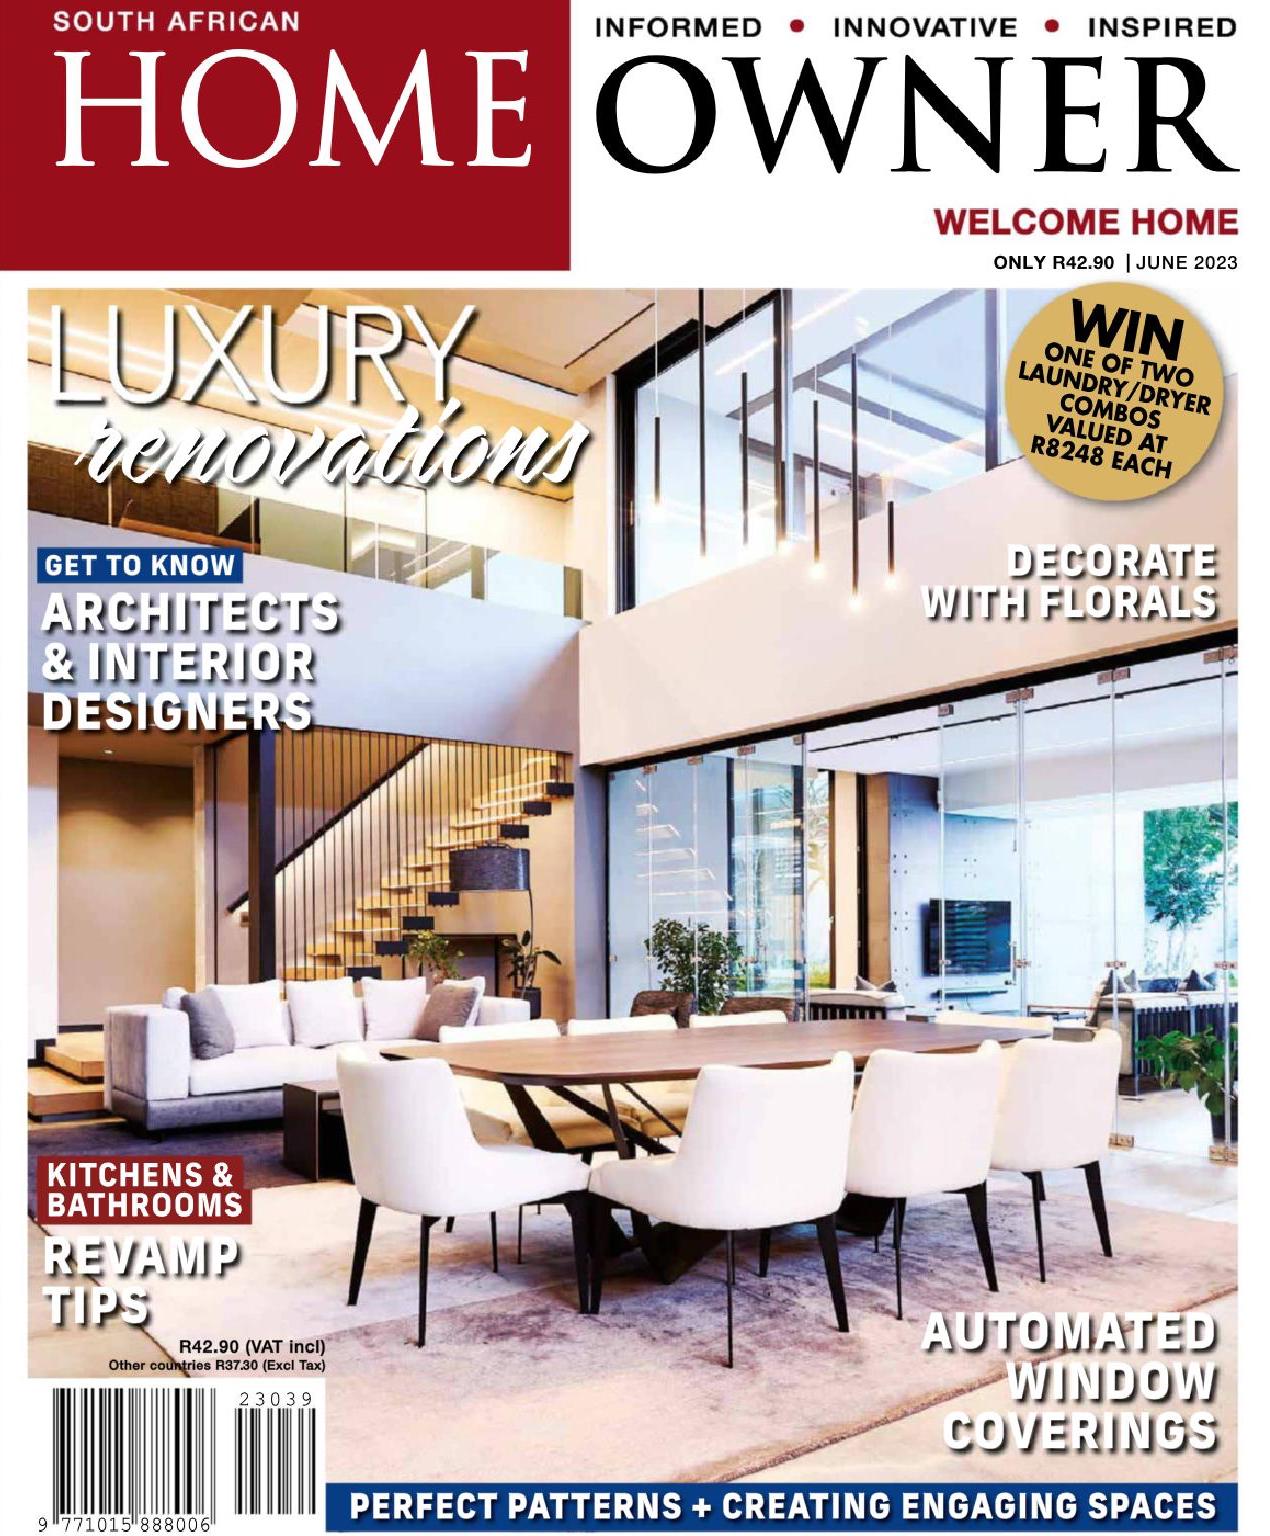 SA home owner magazine june 223 issue